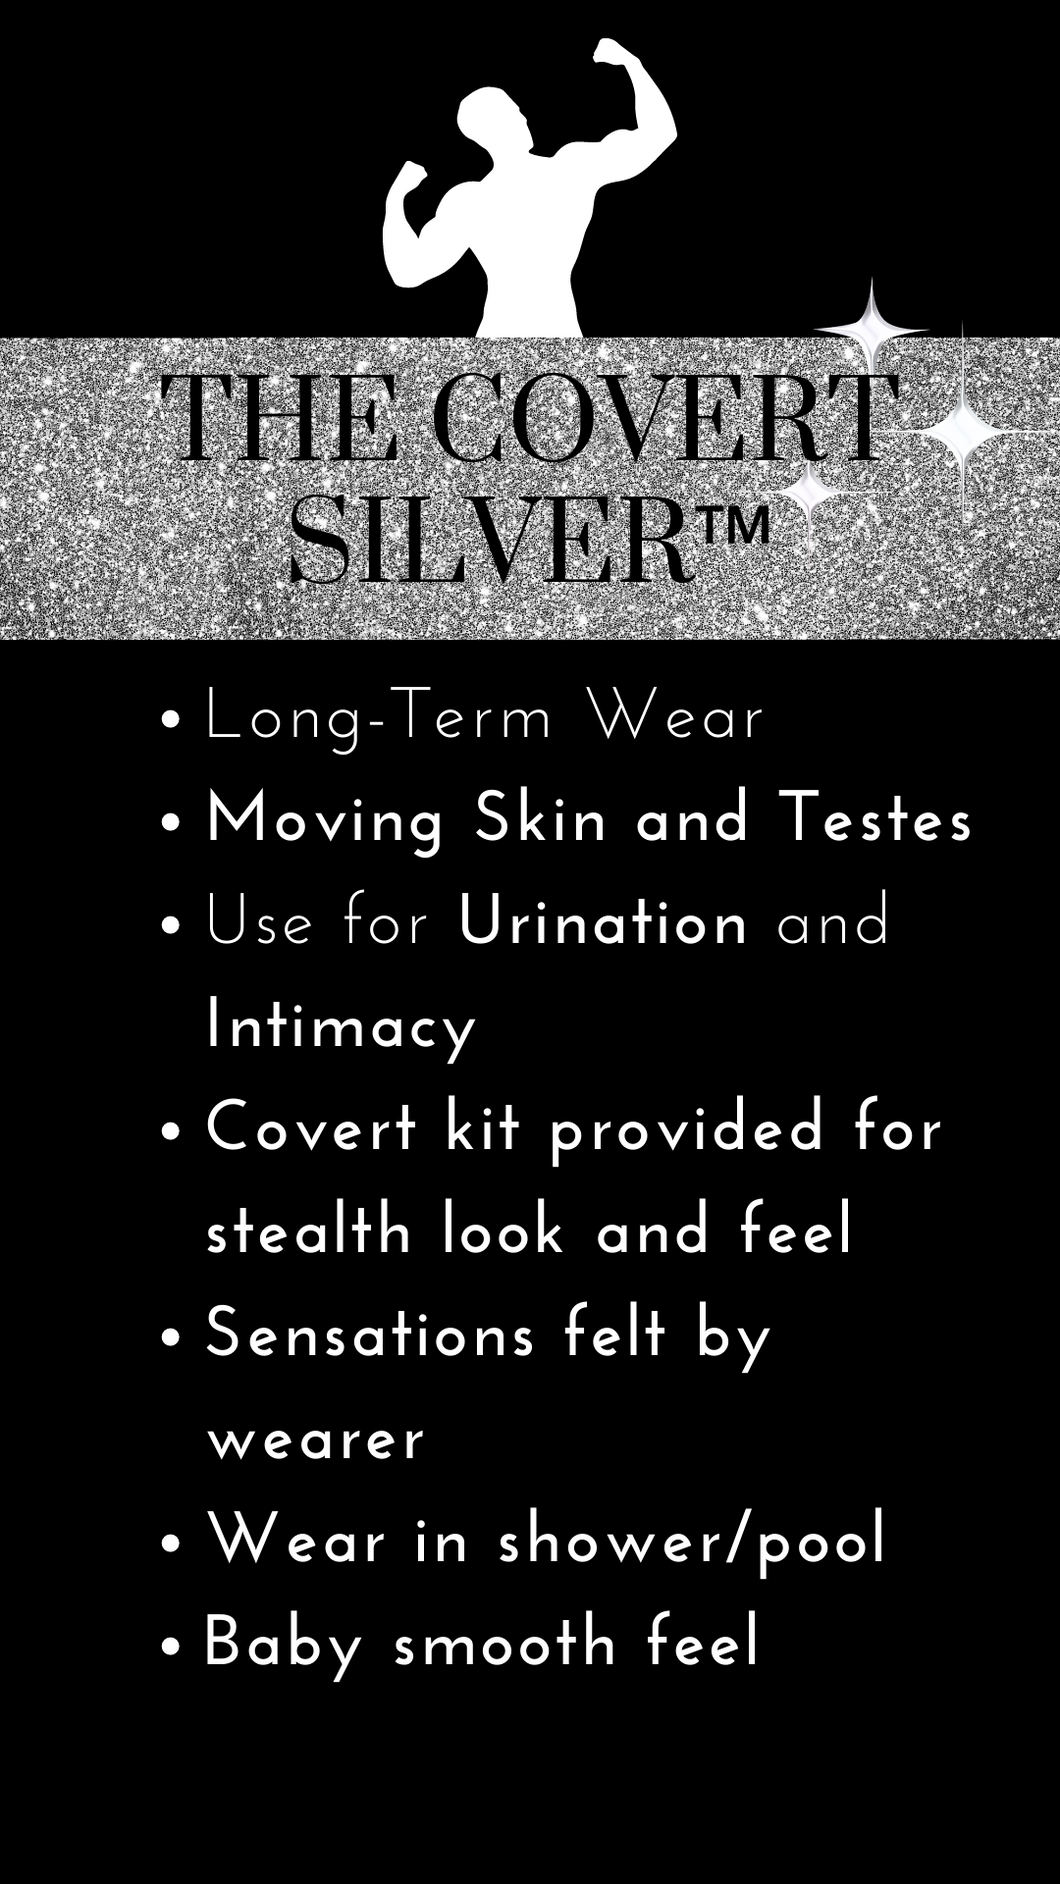 The Covert Silver™